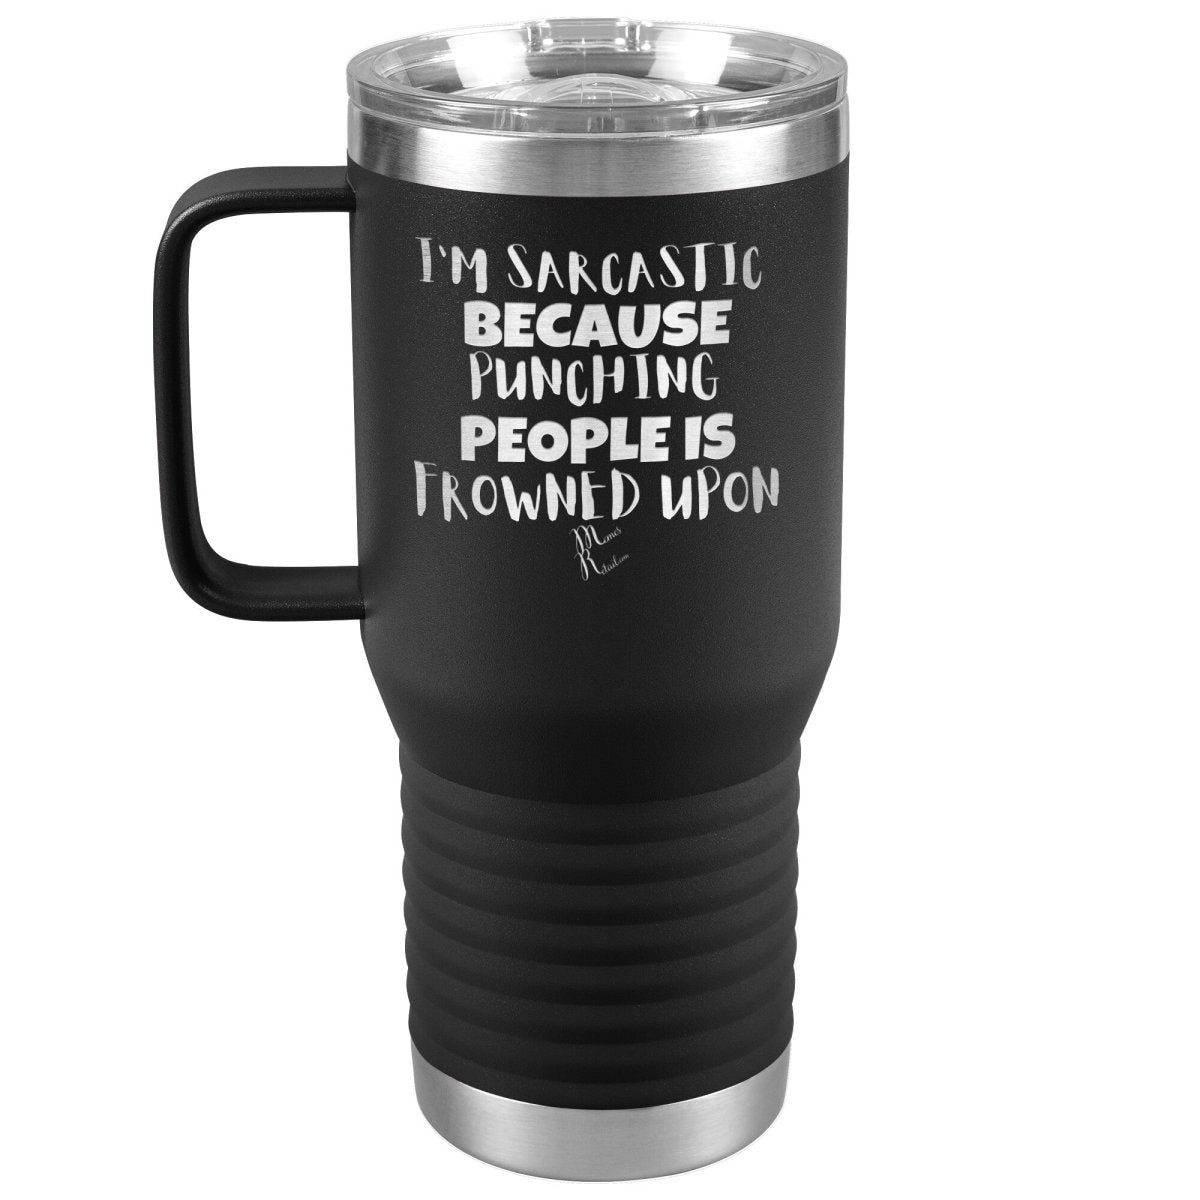 I'm Sarcastic Because Punching People is Frowned Upon Tumblers, 20oz Travel Tumbler / Black - MemesRetail.com